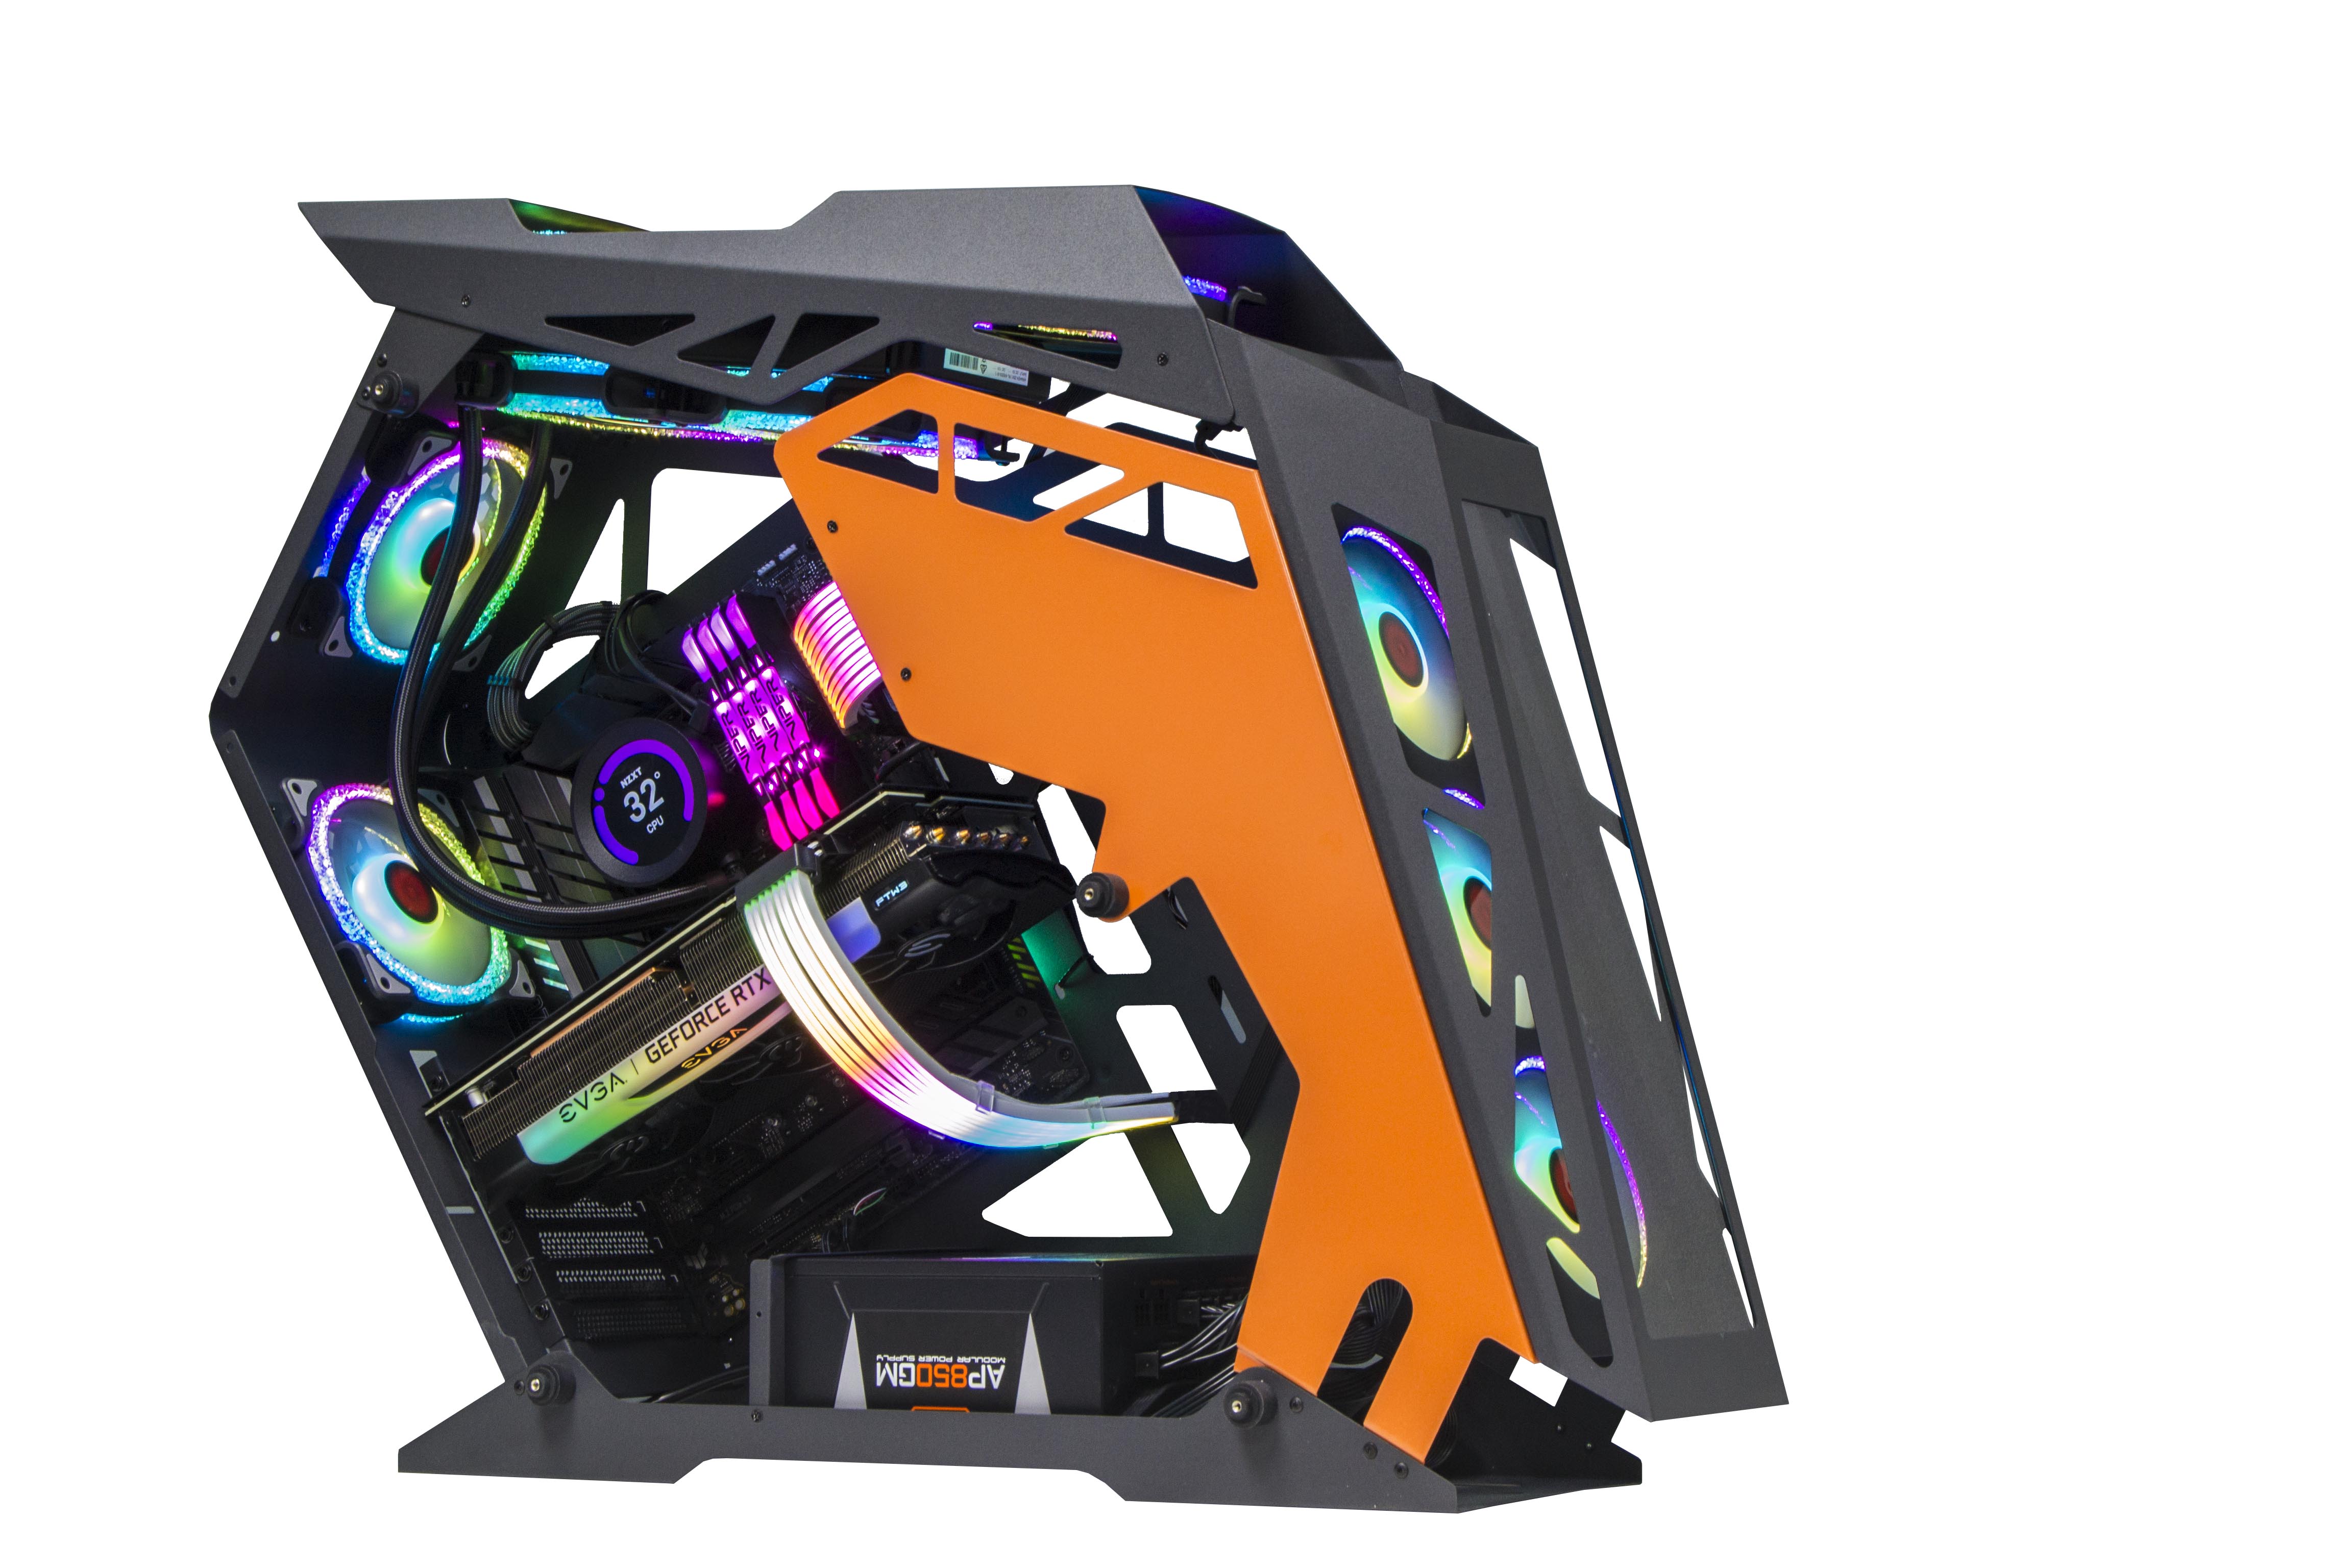 HertSkell Gaming pc